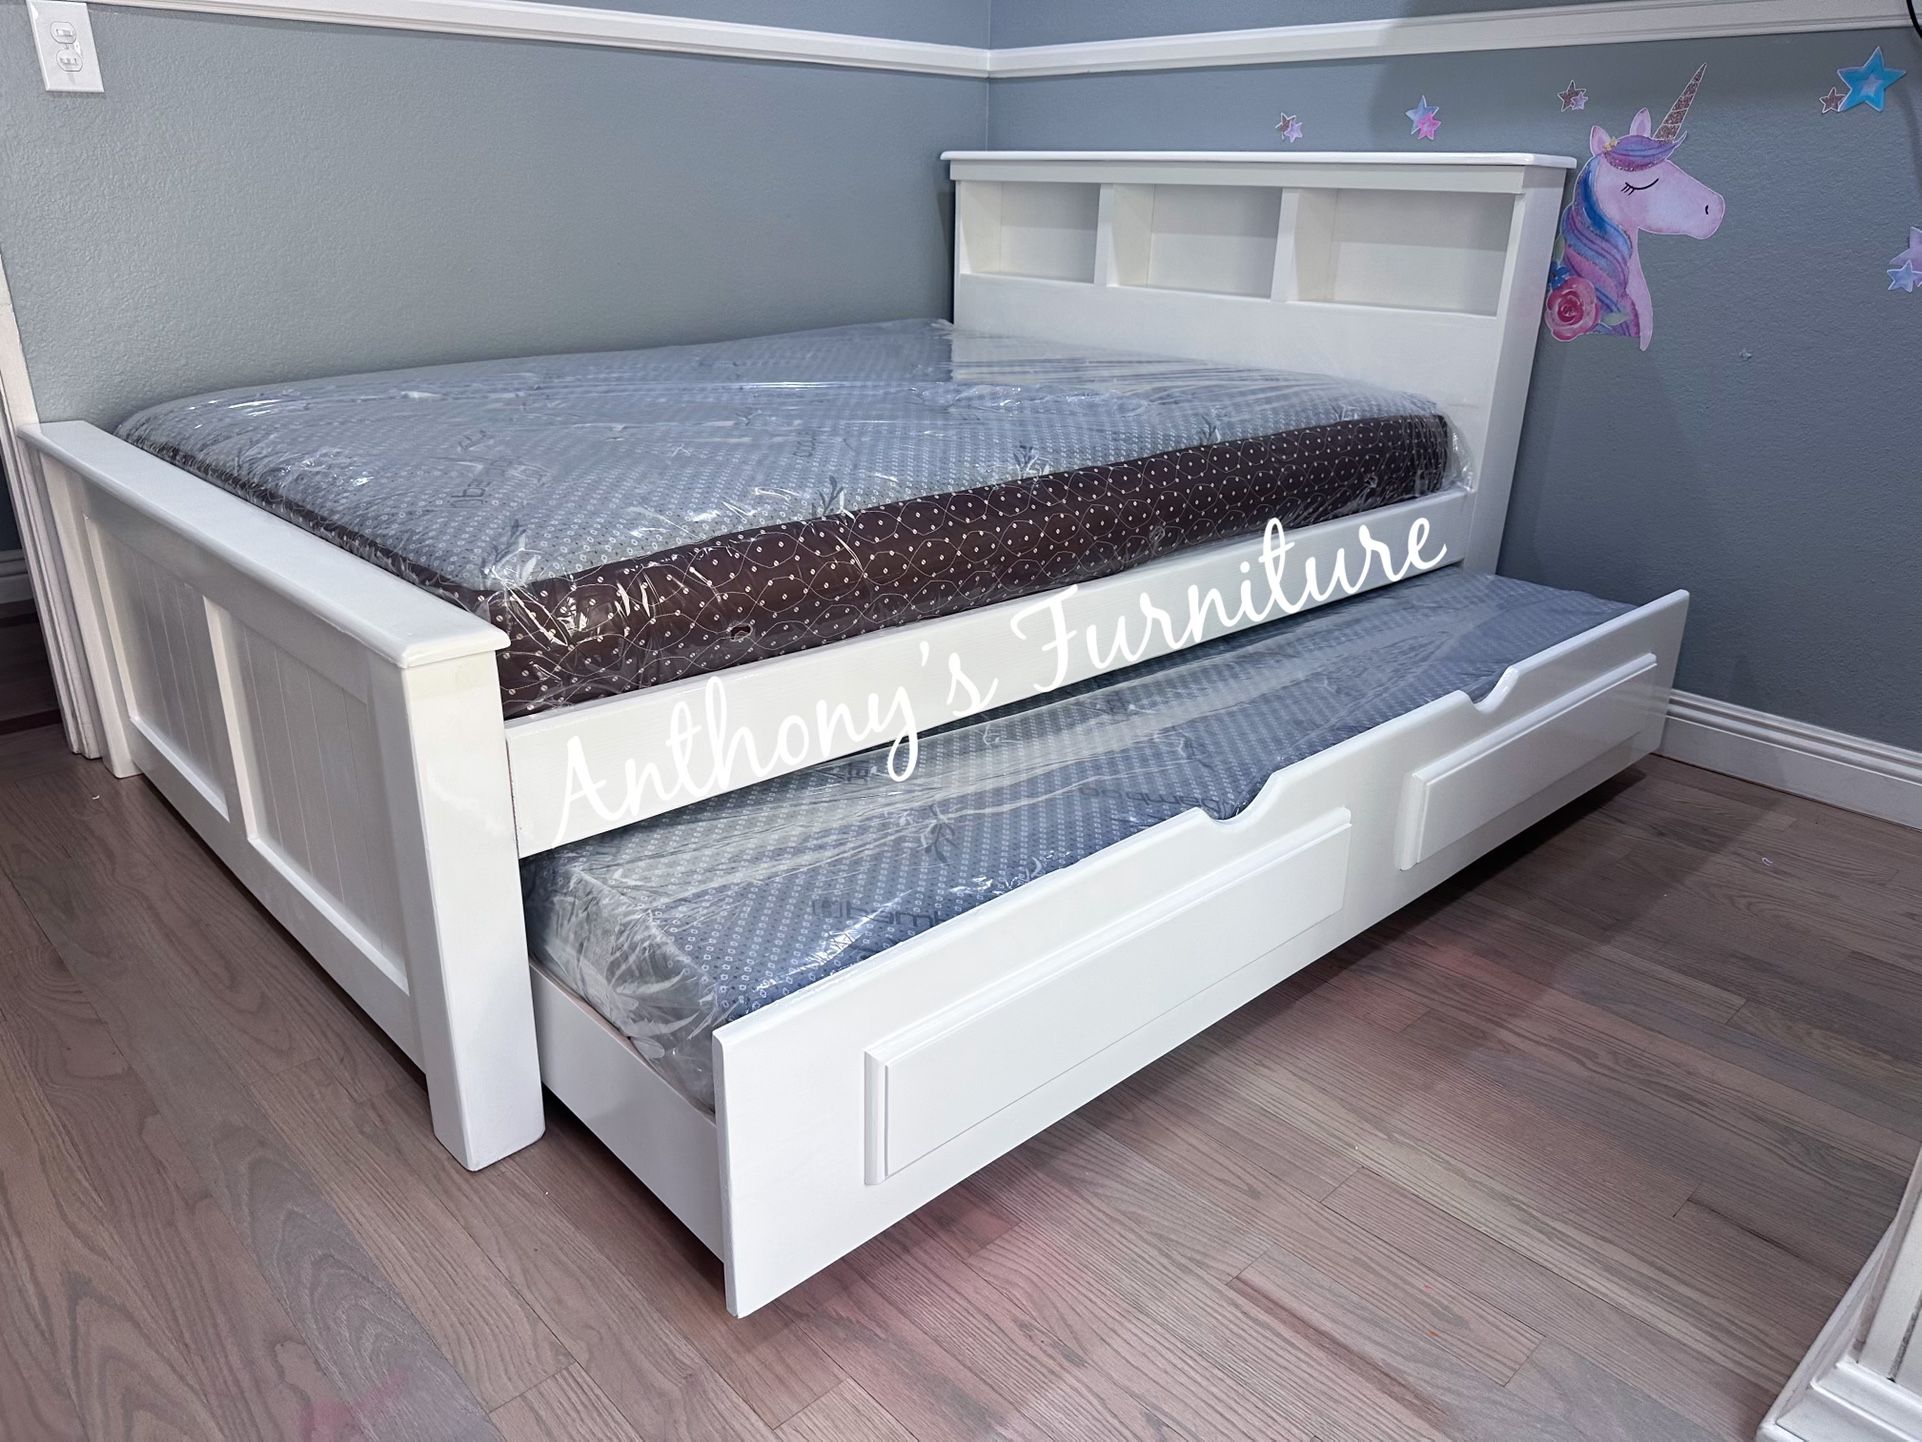 White Full Size Bed Nd Twin Trundle Nd Two Mattresses 